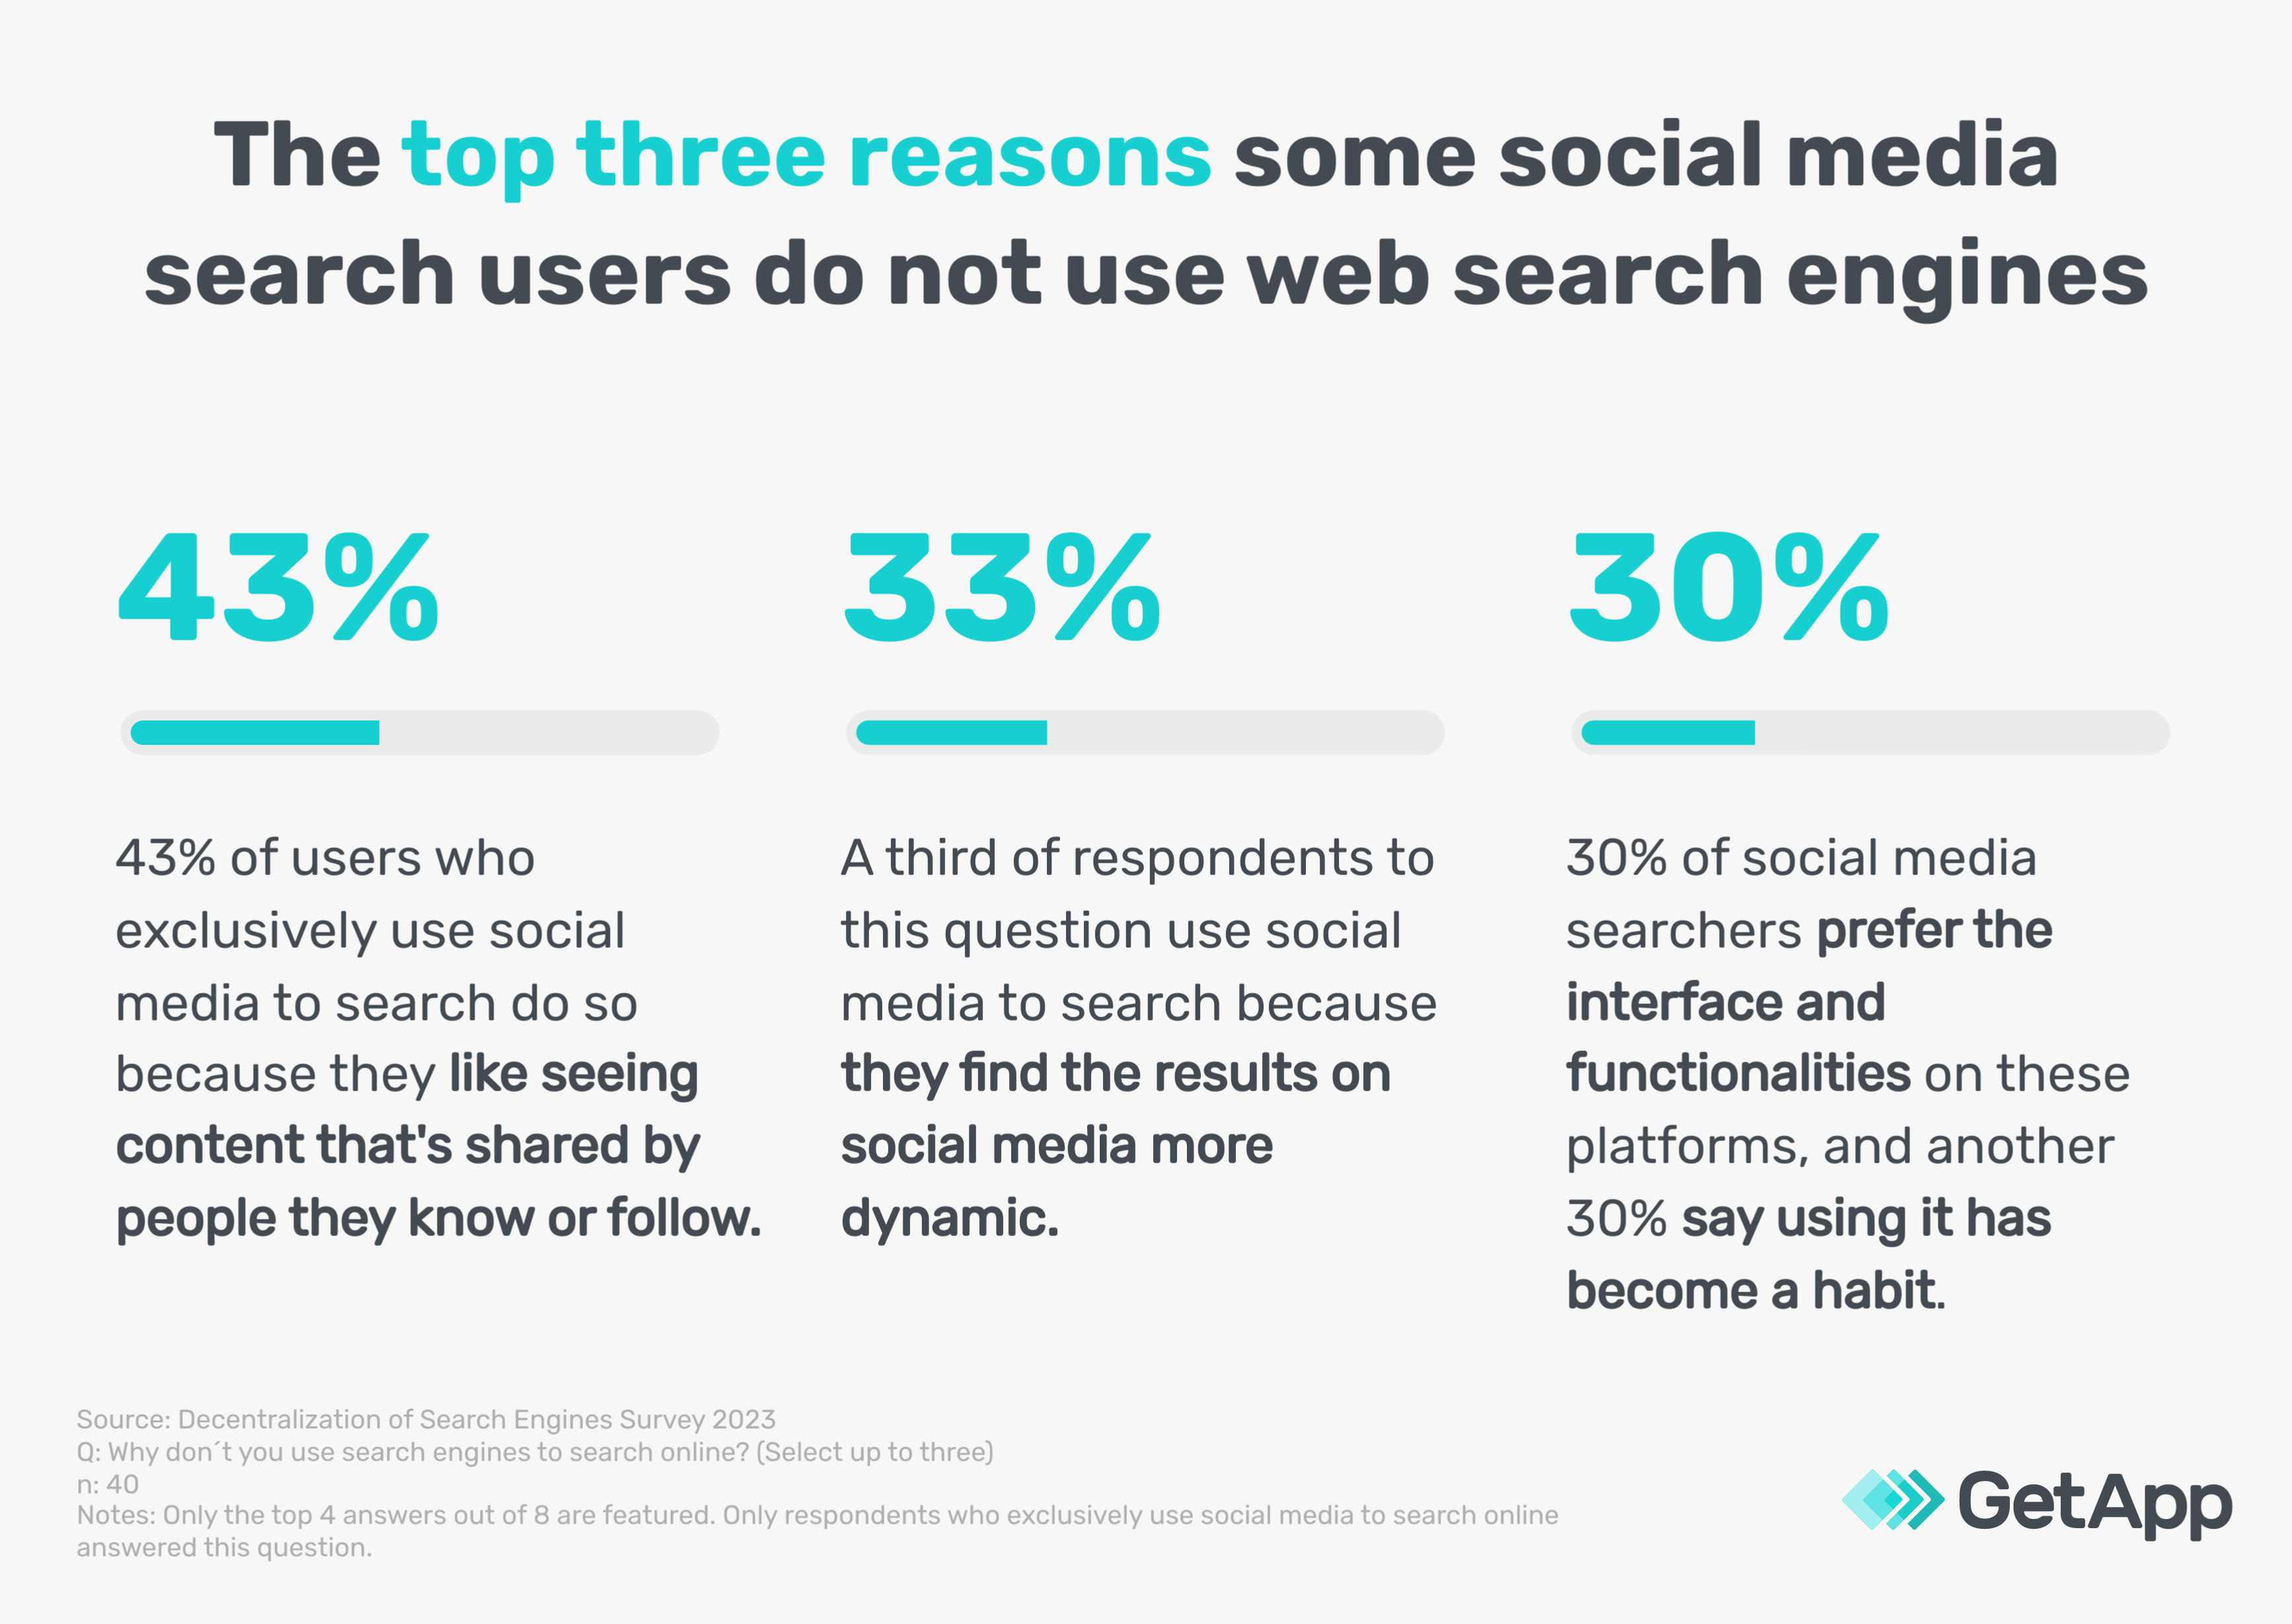 disadvantages of web search engines for social media search users